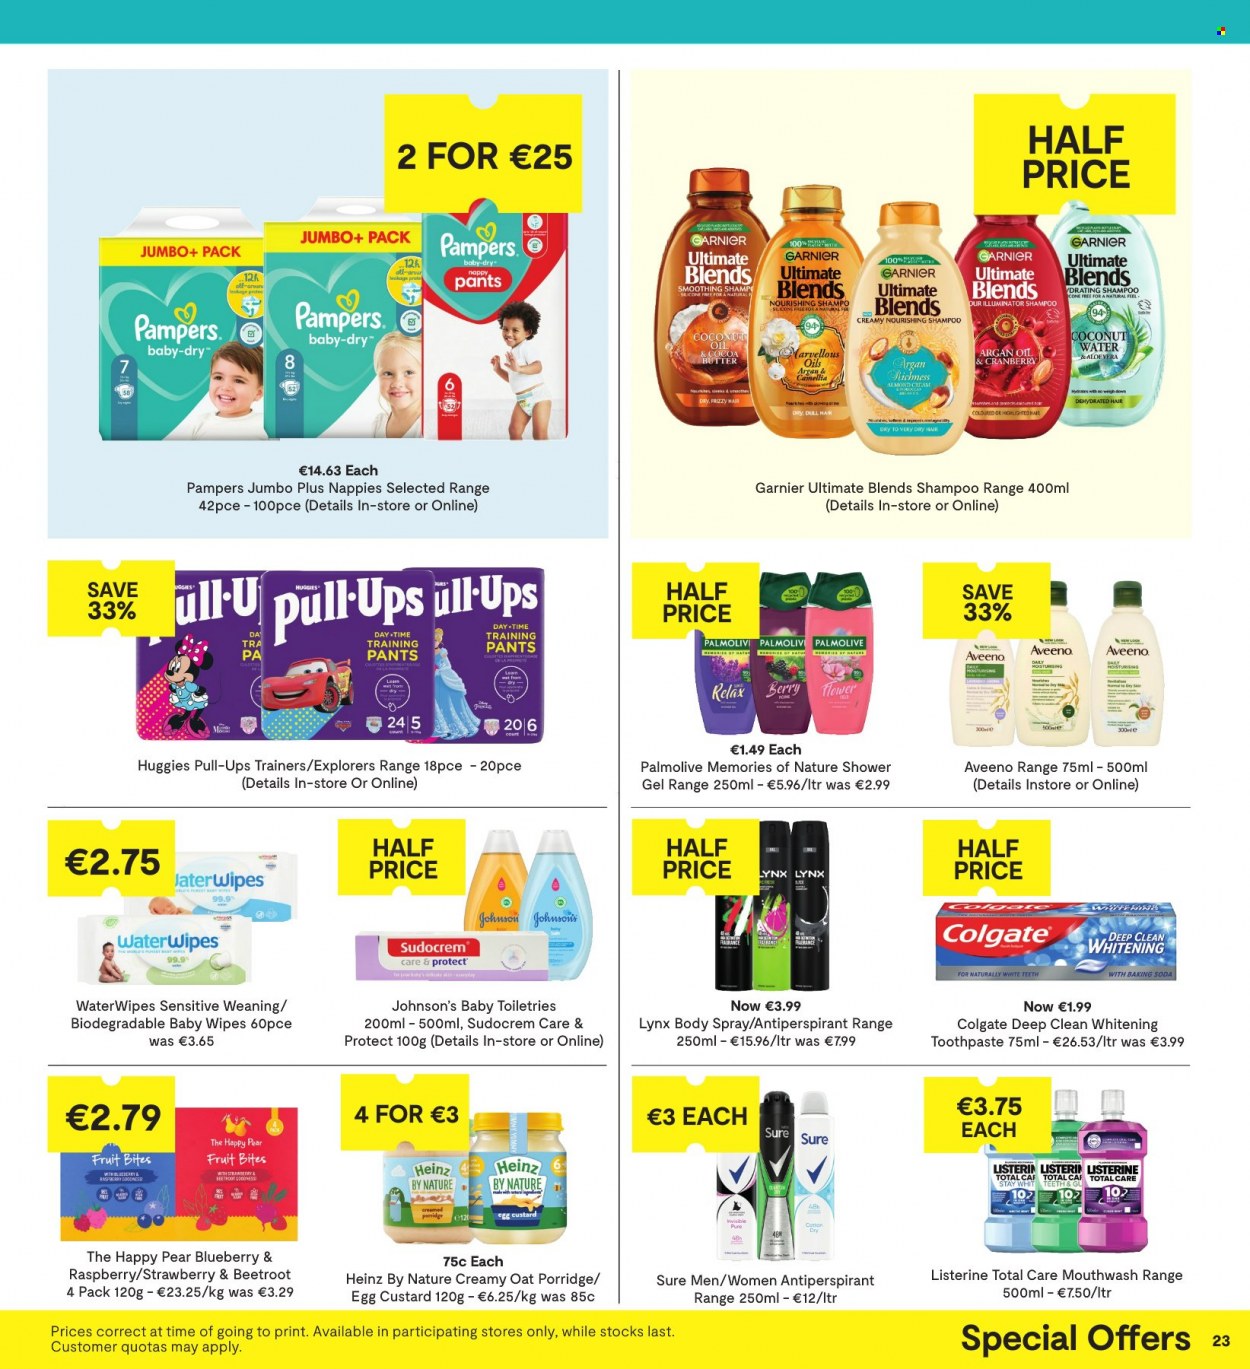 thumbnail - SuperValu offer  - 26.01.2023 - 08.02.2023 - Sales products - beetroot, pears, custard, eggs, bicarbonate of soda, oats, Heinz, porridge, wipes, Huggies, Pampers, pants, baby wipes, nappies, Johnson's, baby pants, Aveeno, shampoo, shower gel, Palmolive, Colgate, Listerine, toothpaste, mouthwash, Garnier, body spray, anti-perspirant, Sure, argan oil, Sudocrem. Page 23.